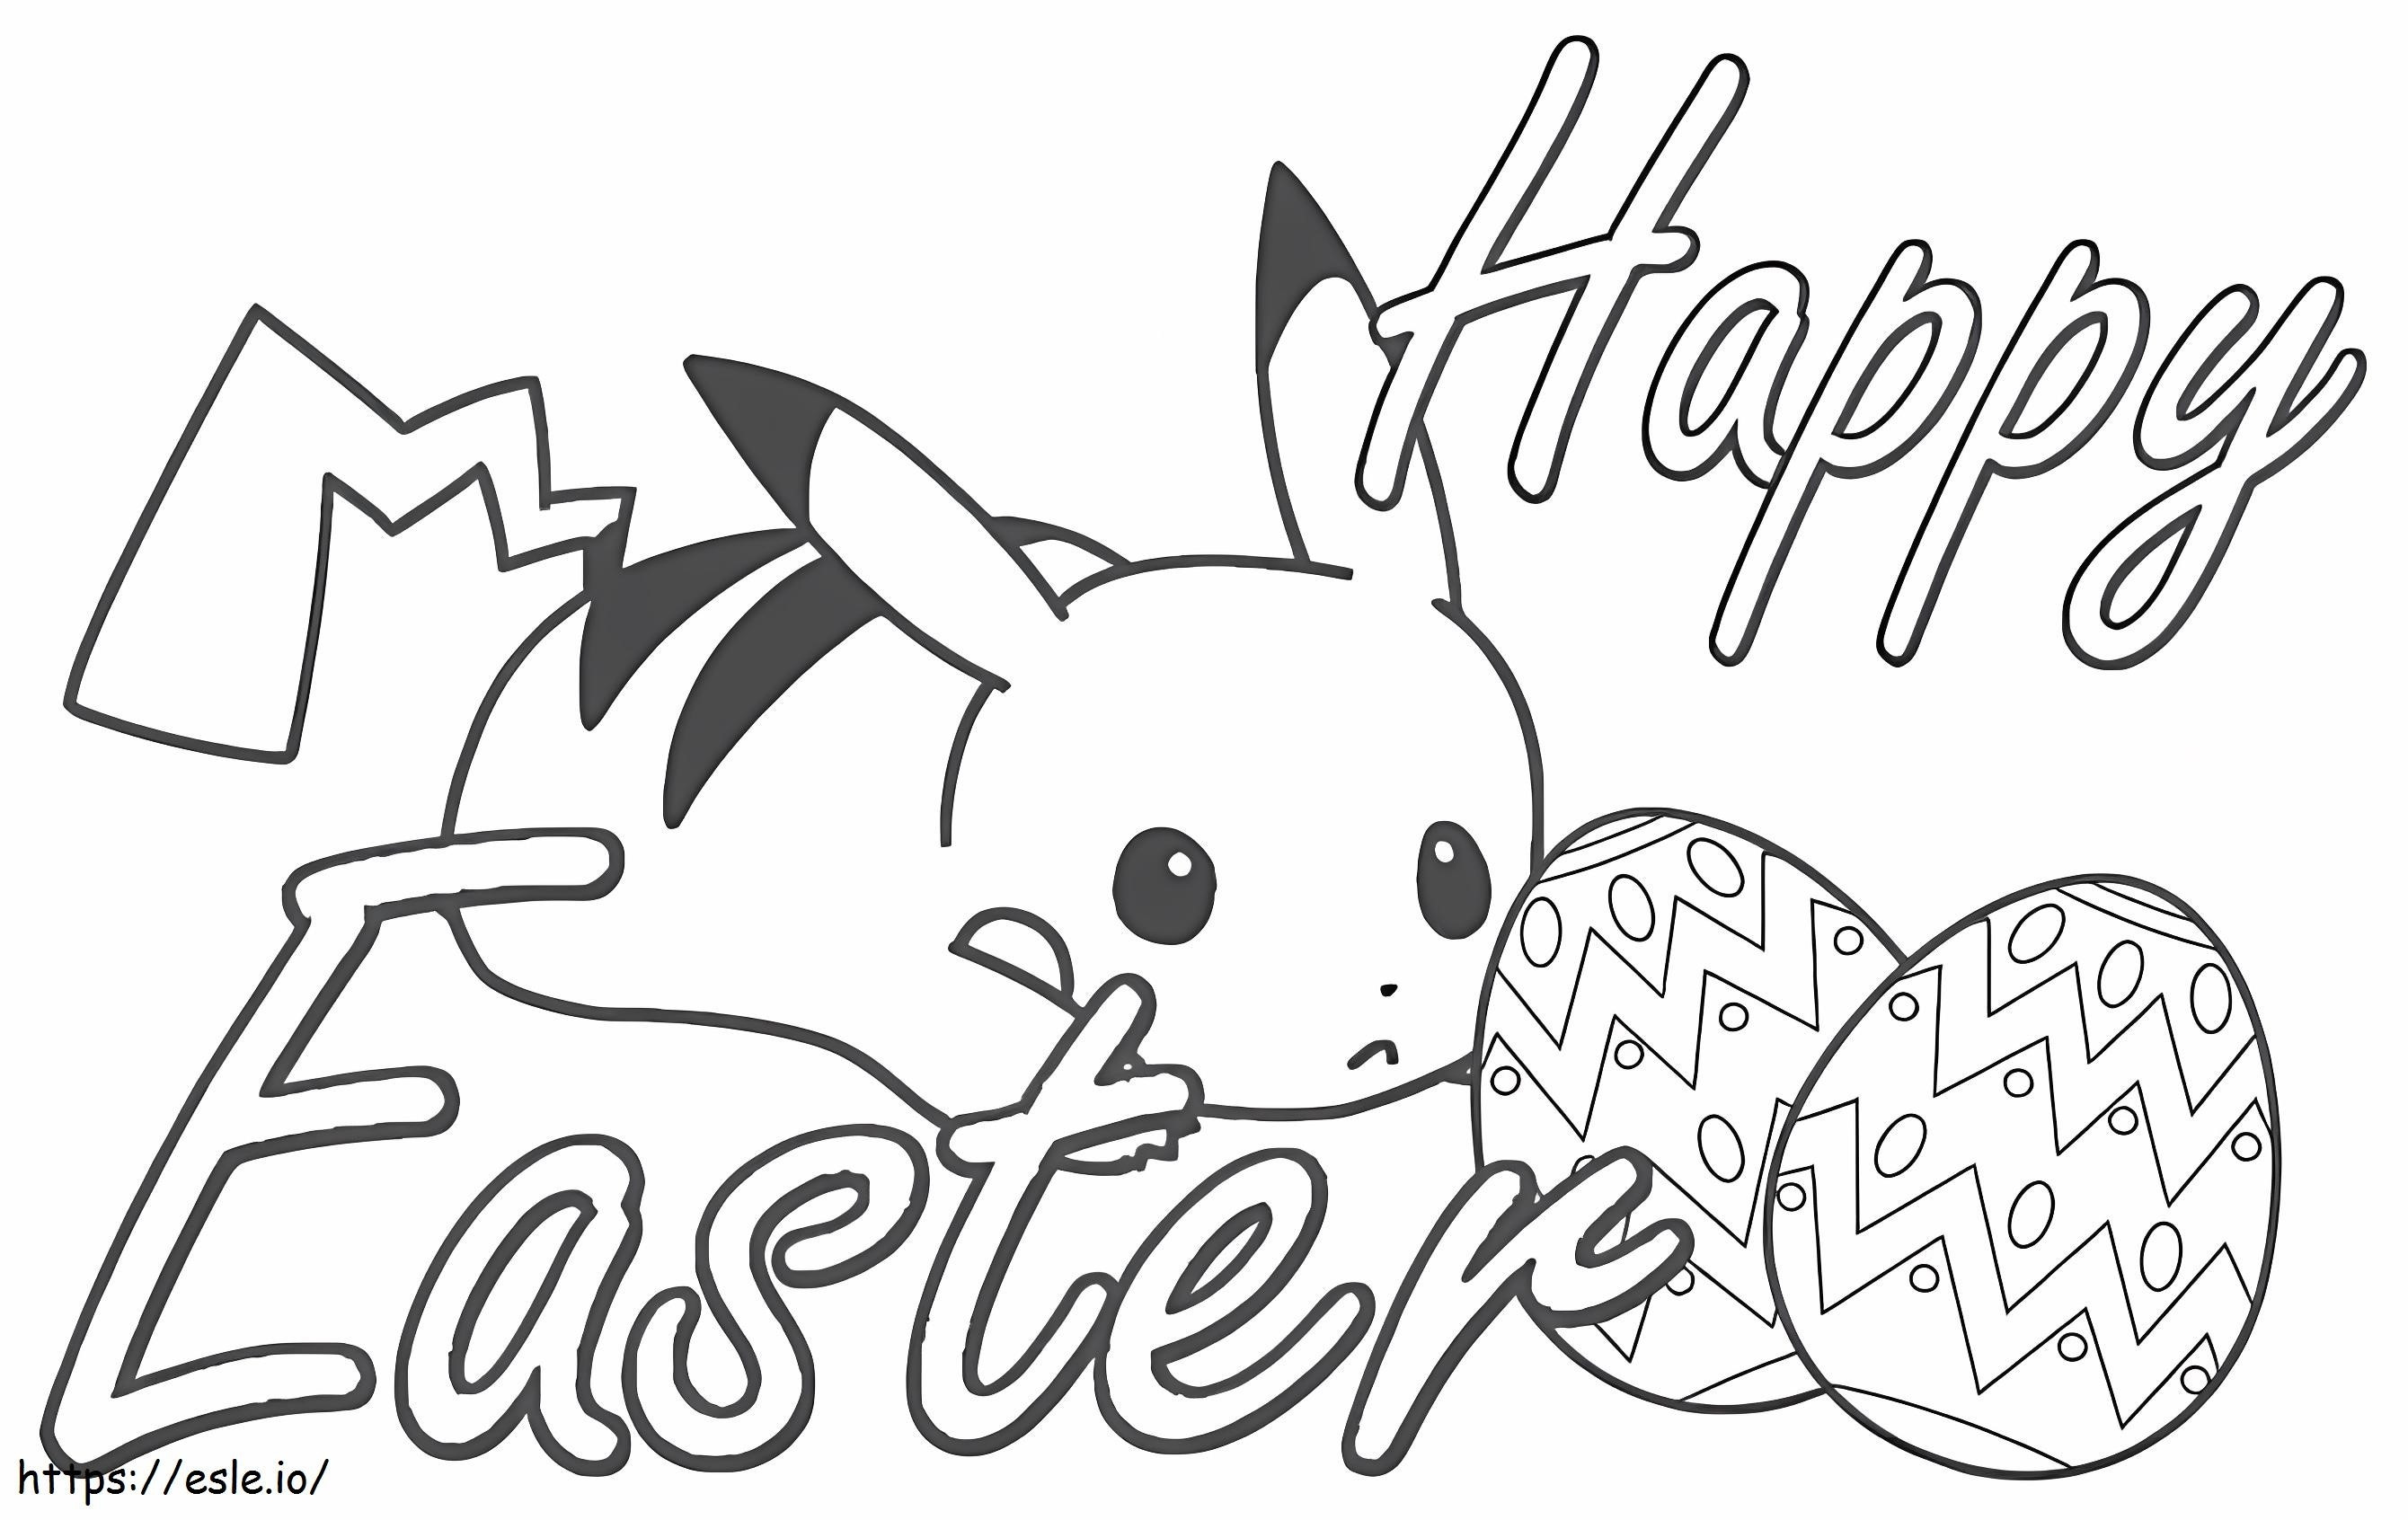 Pikachu And Easter Egg coloring page